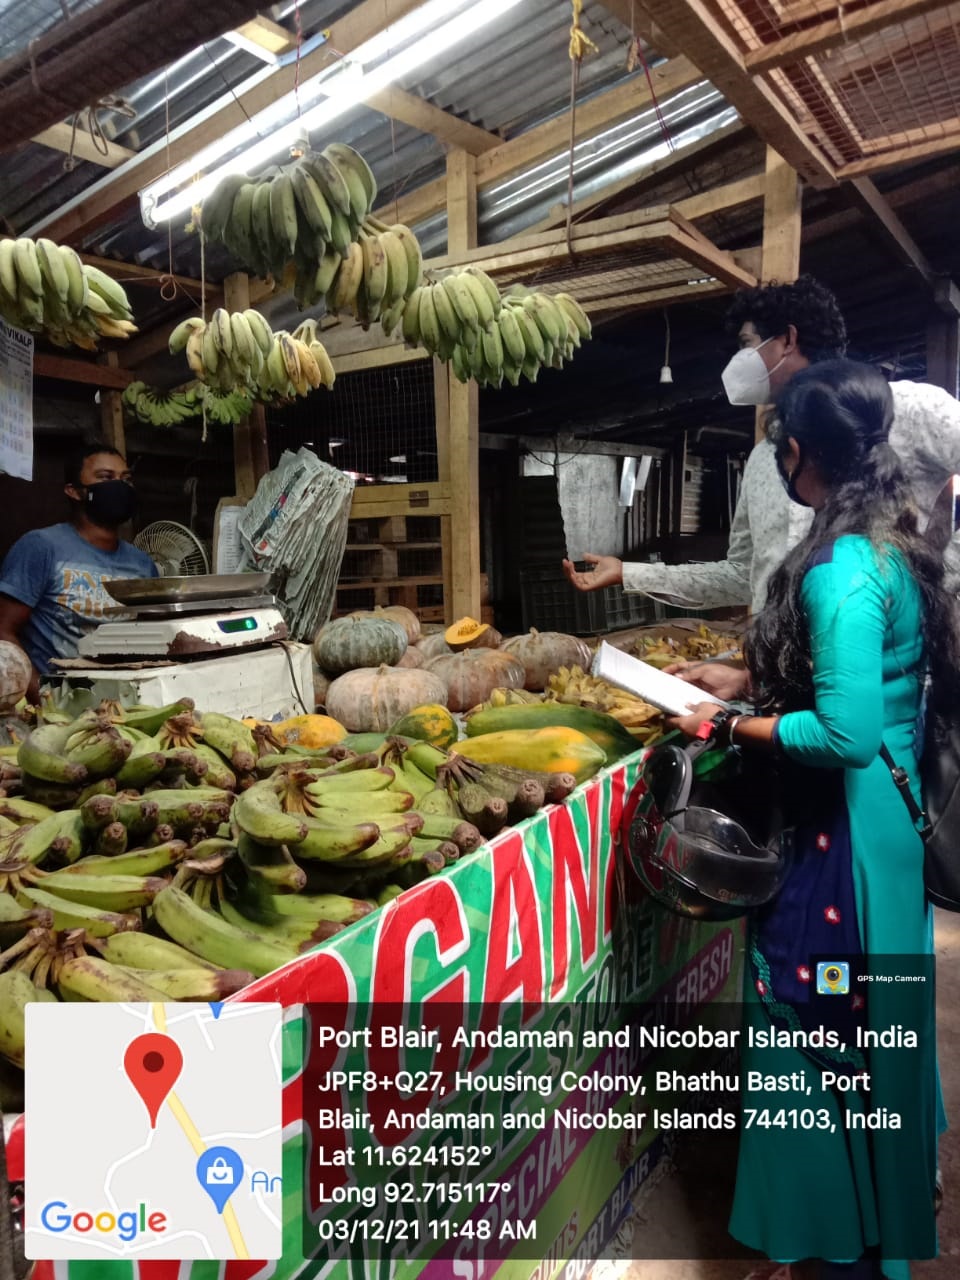 Case study on waste generation and disposal survey at Port Blair market